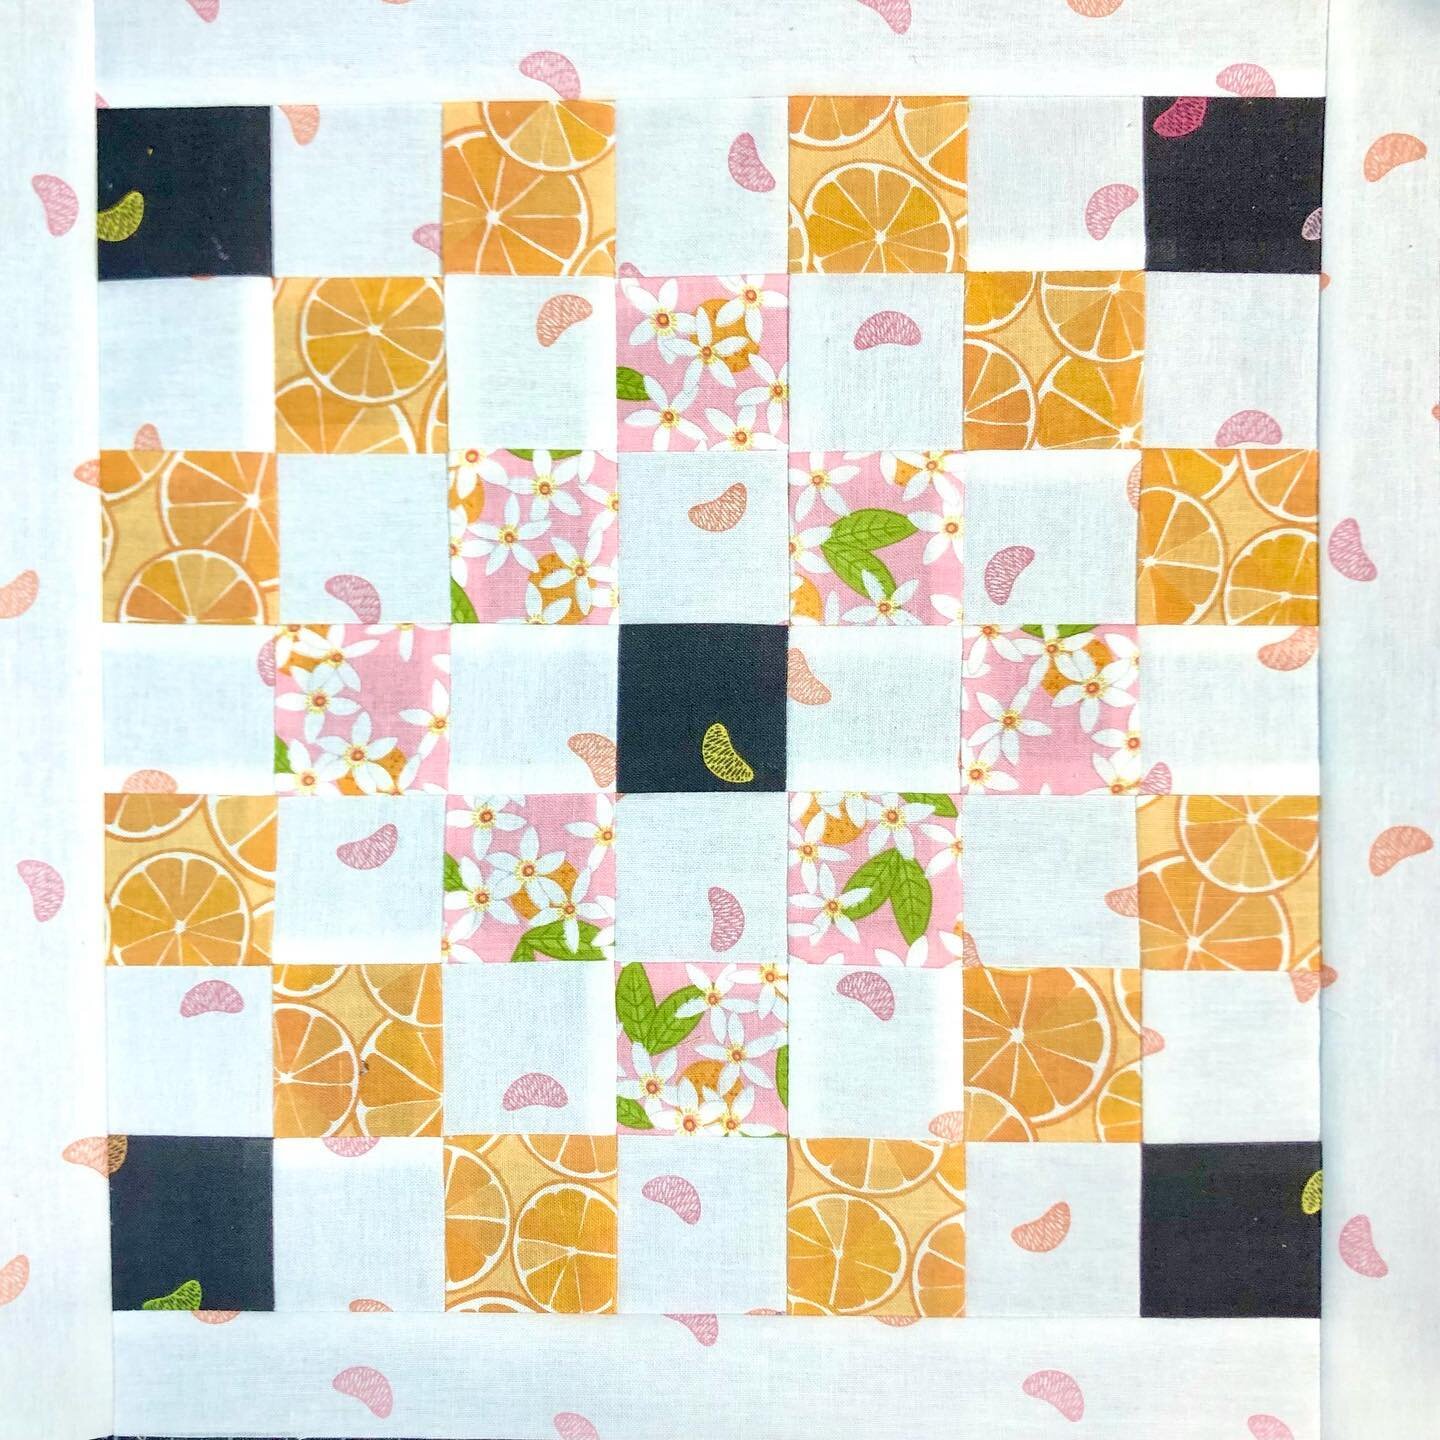 It&rsquo;s Sew Along Day!  Yay!
Head over to my blog (link in bio) to get going on Week 3 of the Gracious Grove Sew Along. #graciousgrovesewalong #jillilystudio #rileyblakedesigns #sewalongs  #piecing #quiltsofinstagram  #quiltblocks